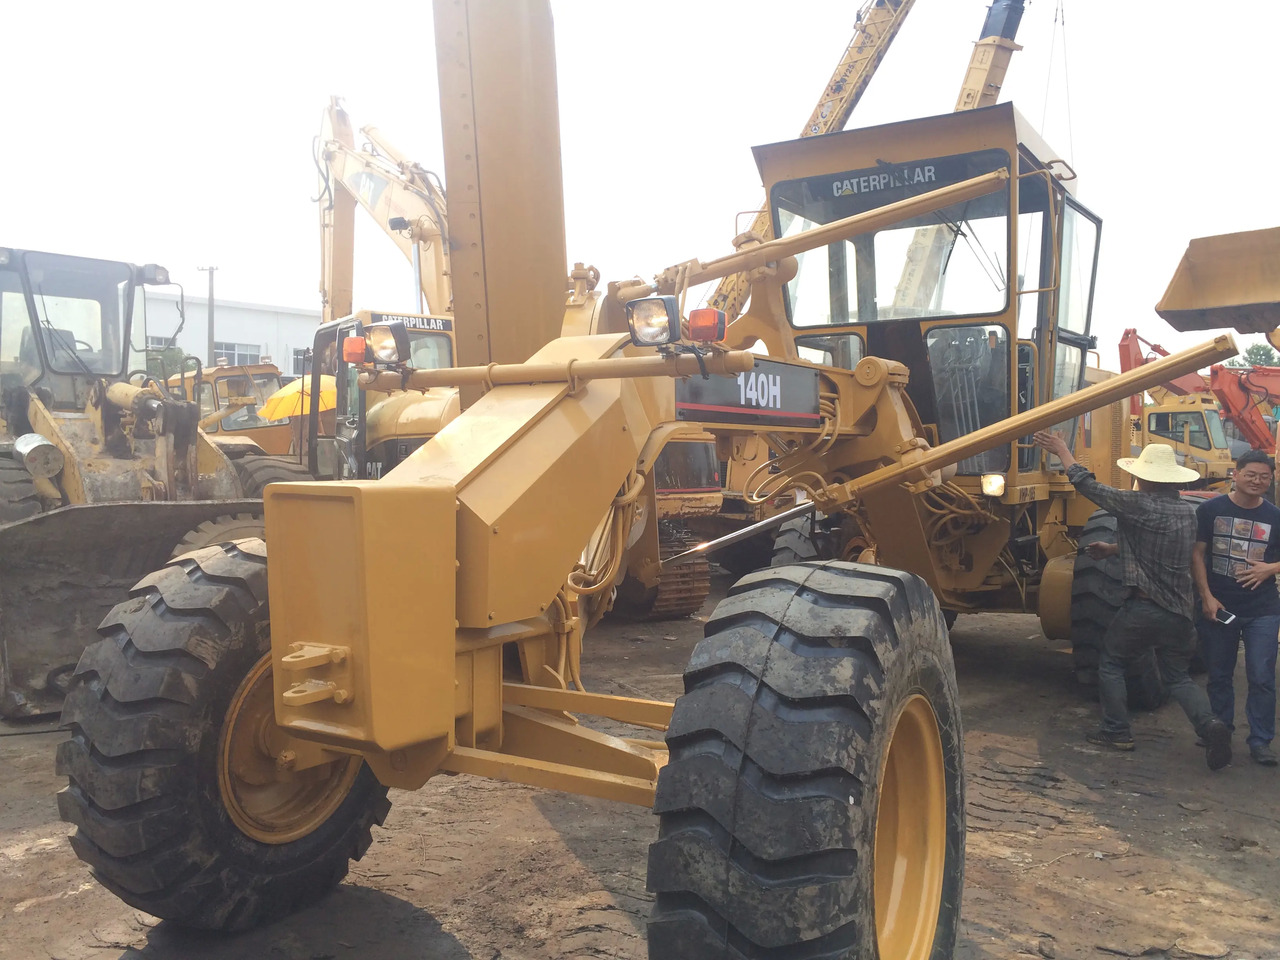 Greiders Hot sale Used Cat 140H motor grader with good condition,USED heavy equipment used motor grader CAT 140H grader in China: foto 2